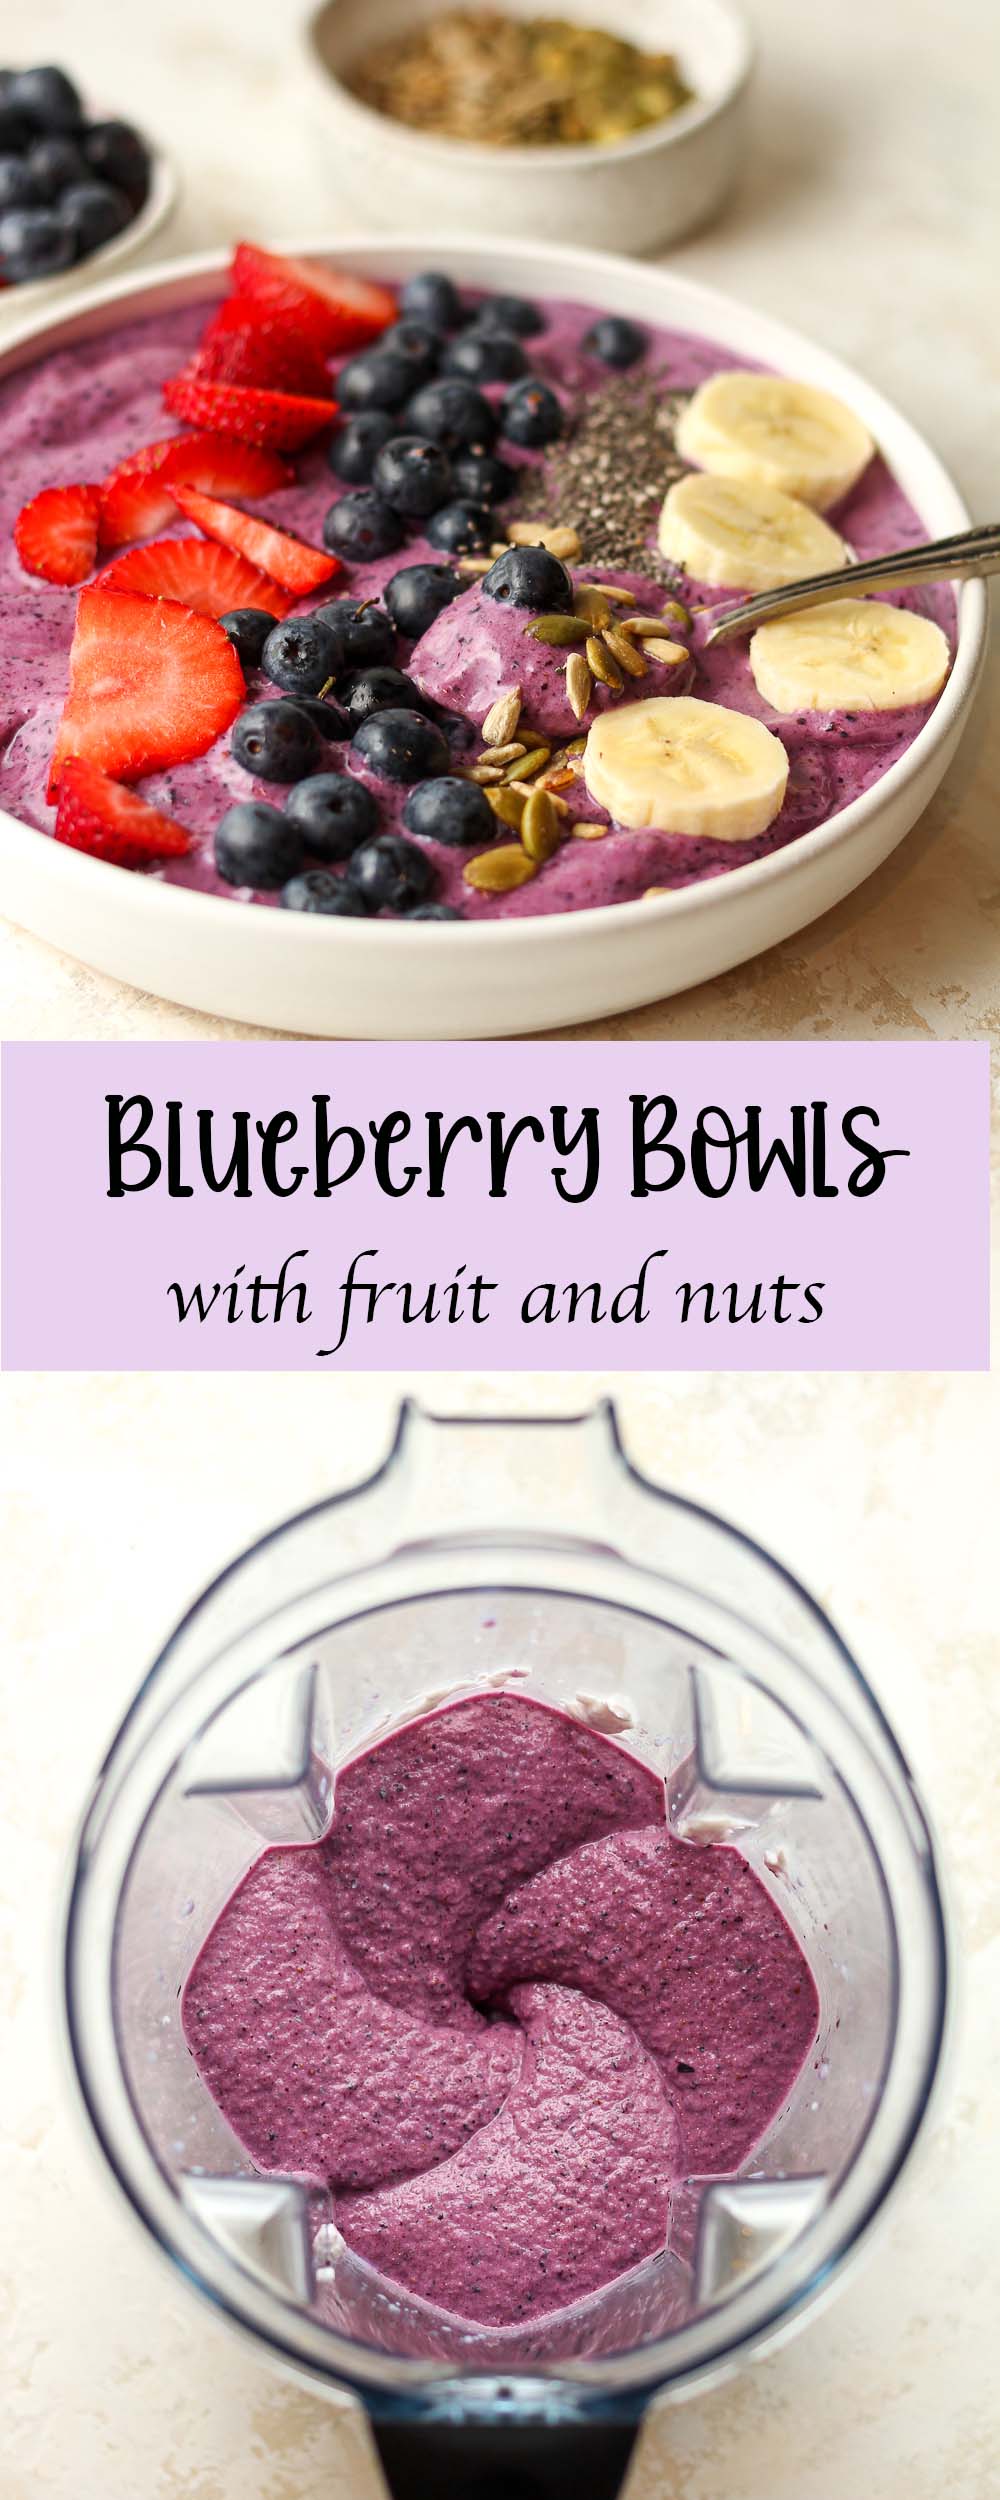 Two photos - side view of a blueberry bowl with fruit and a blender of blueberry smoothies.